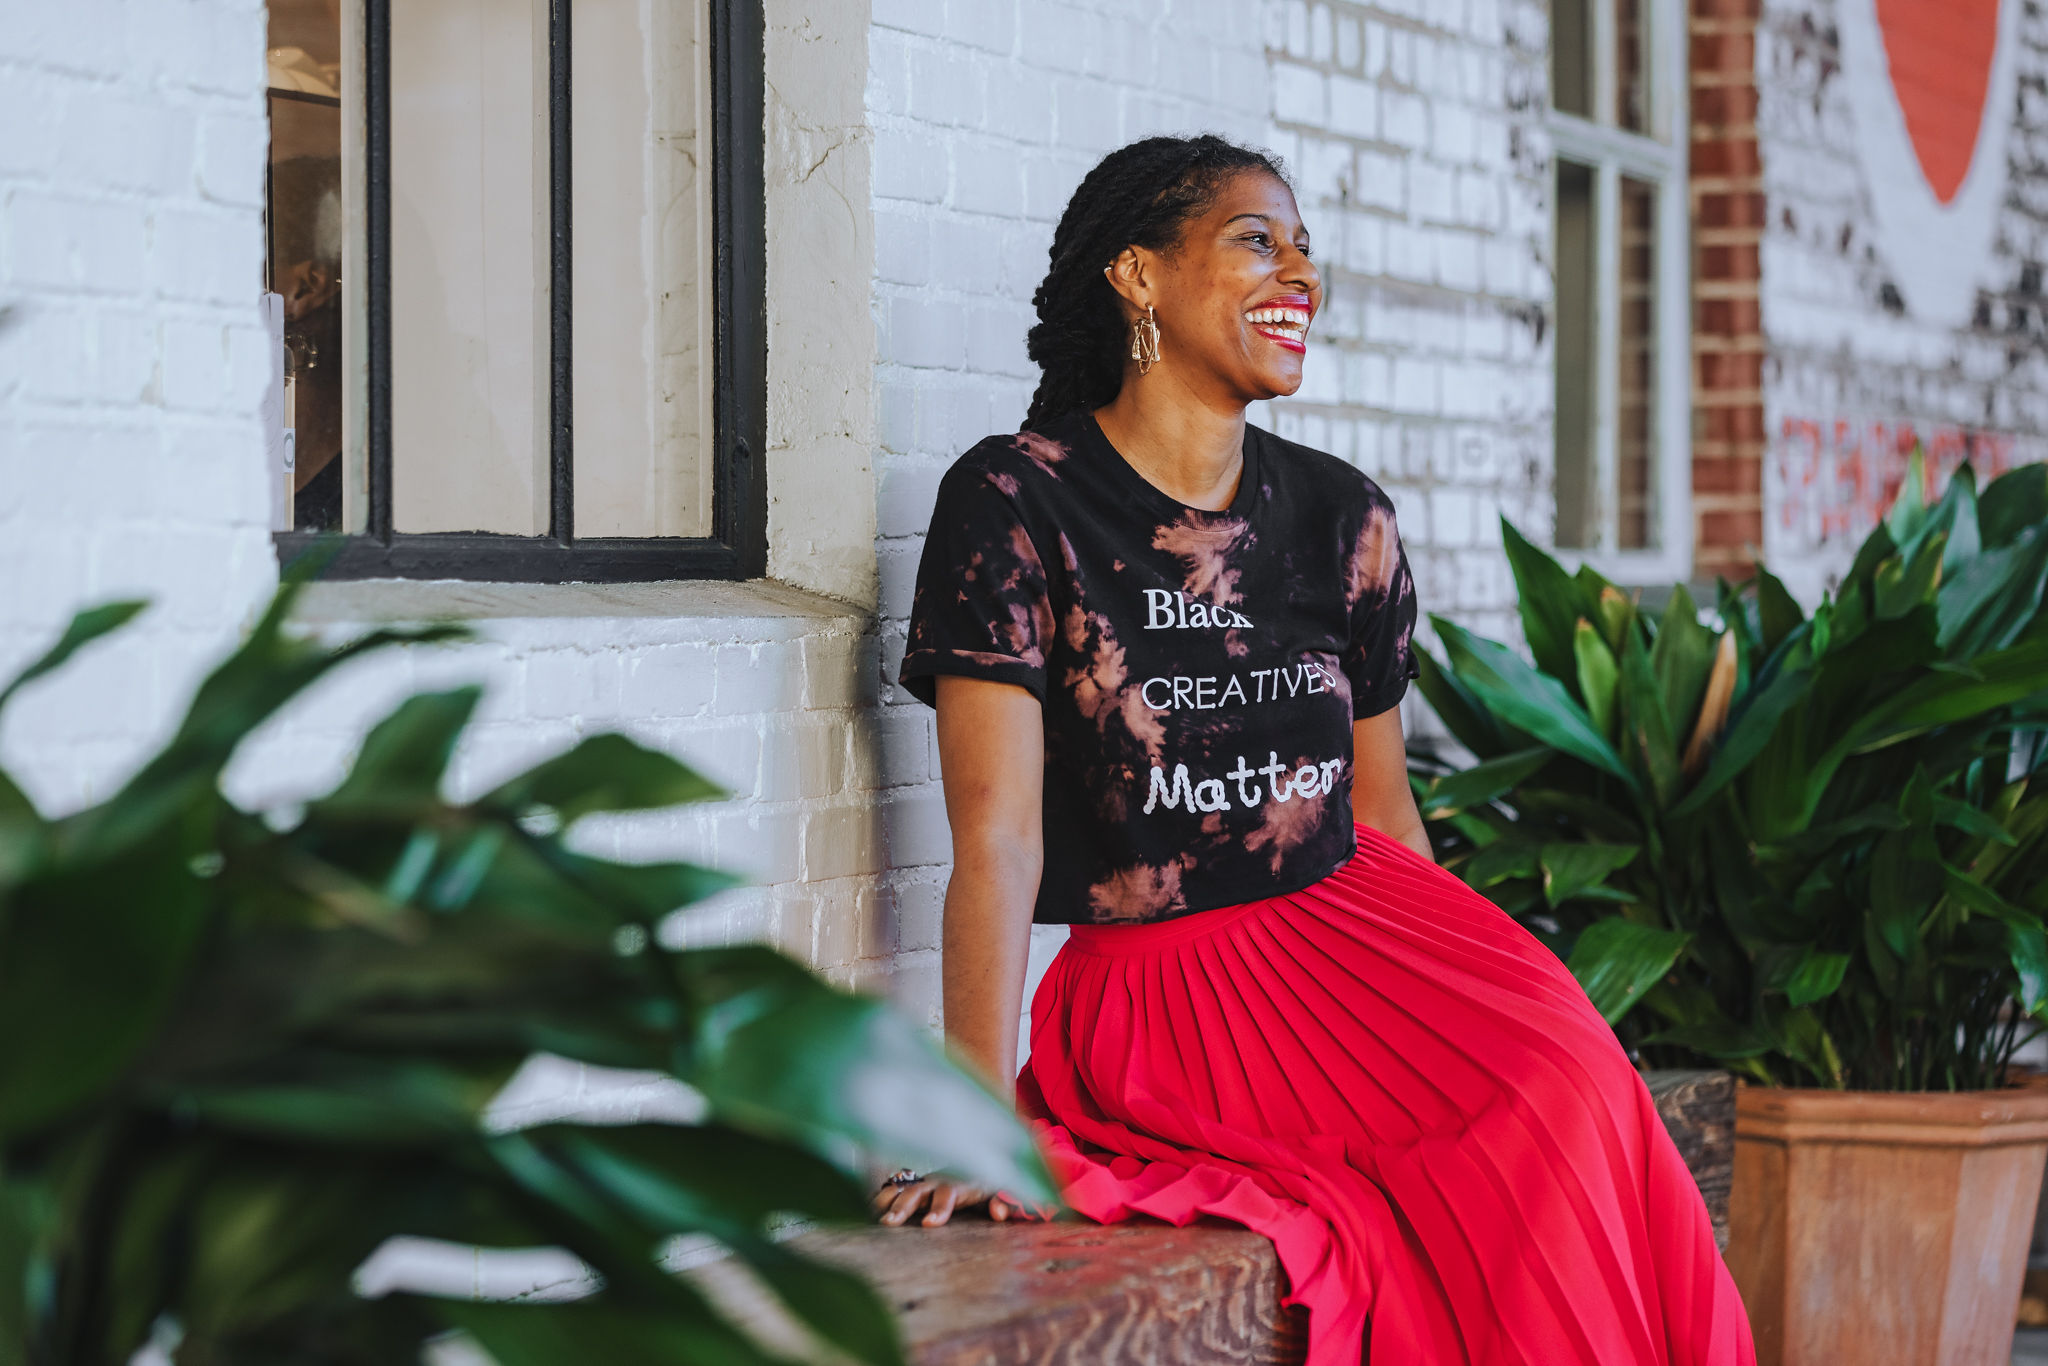 She’s Pretty and Black Owned: Meet Nakia Booker